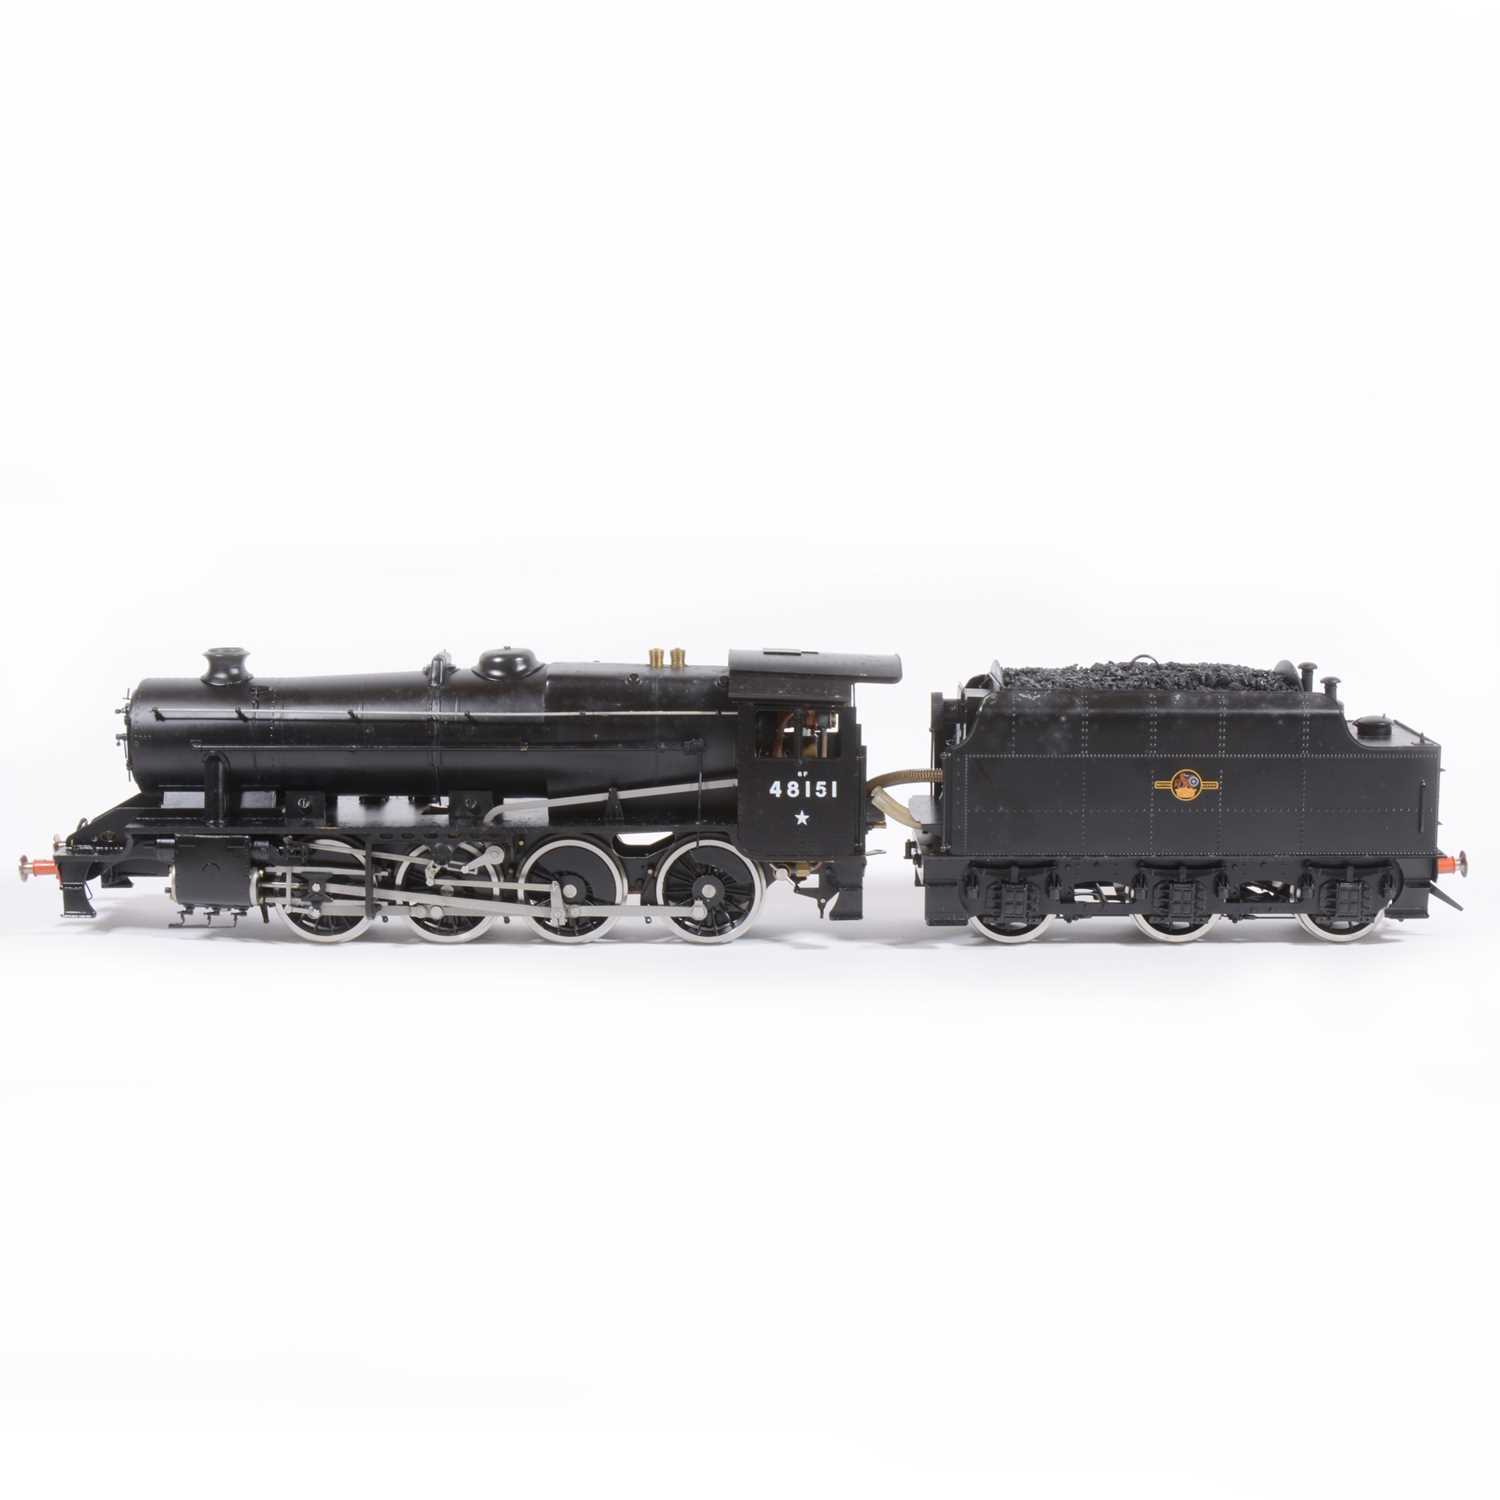 Lot 9 - Bowande live steam, gauge 1 / G scale, 45mm locomotive and tender, 8F 2-8-0 no.48151, black, boxed with instructions.